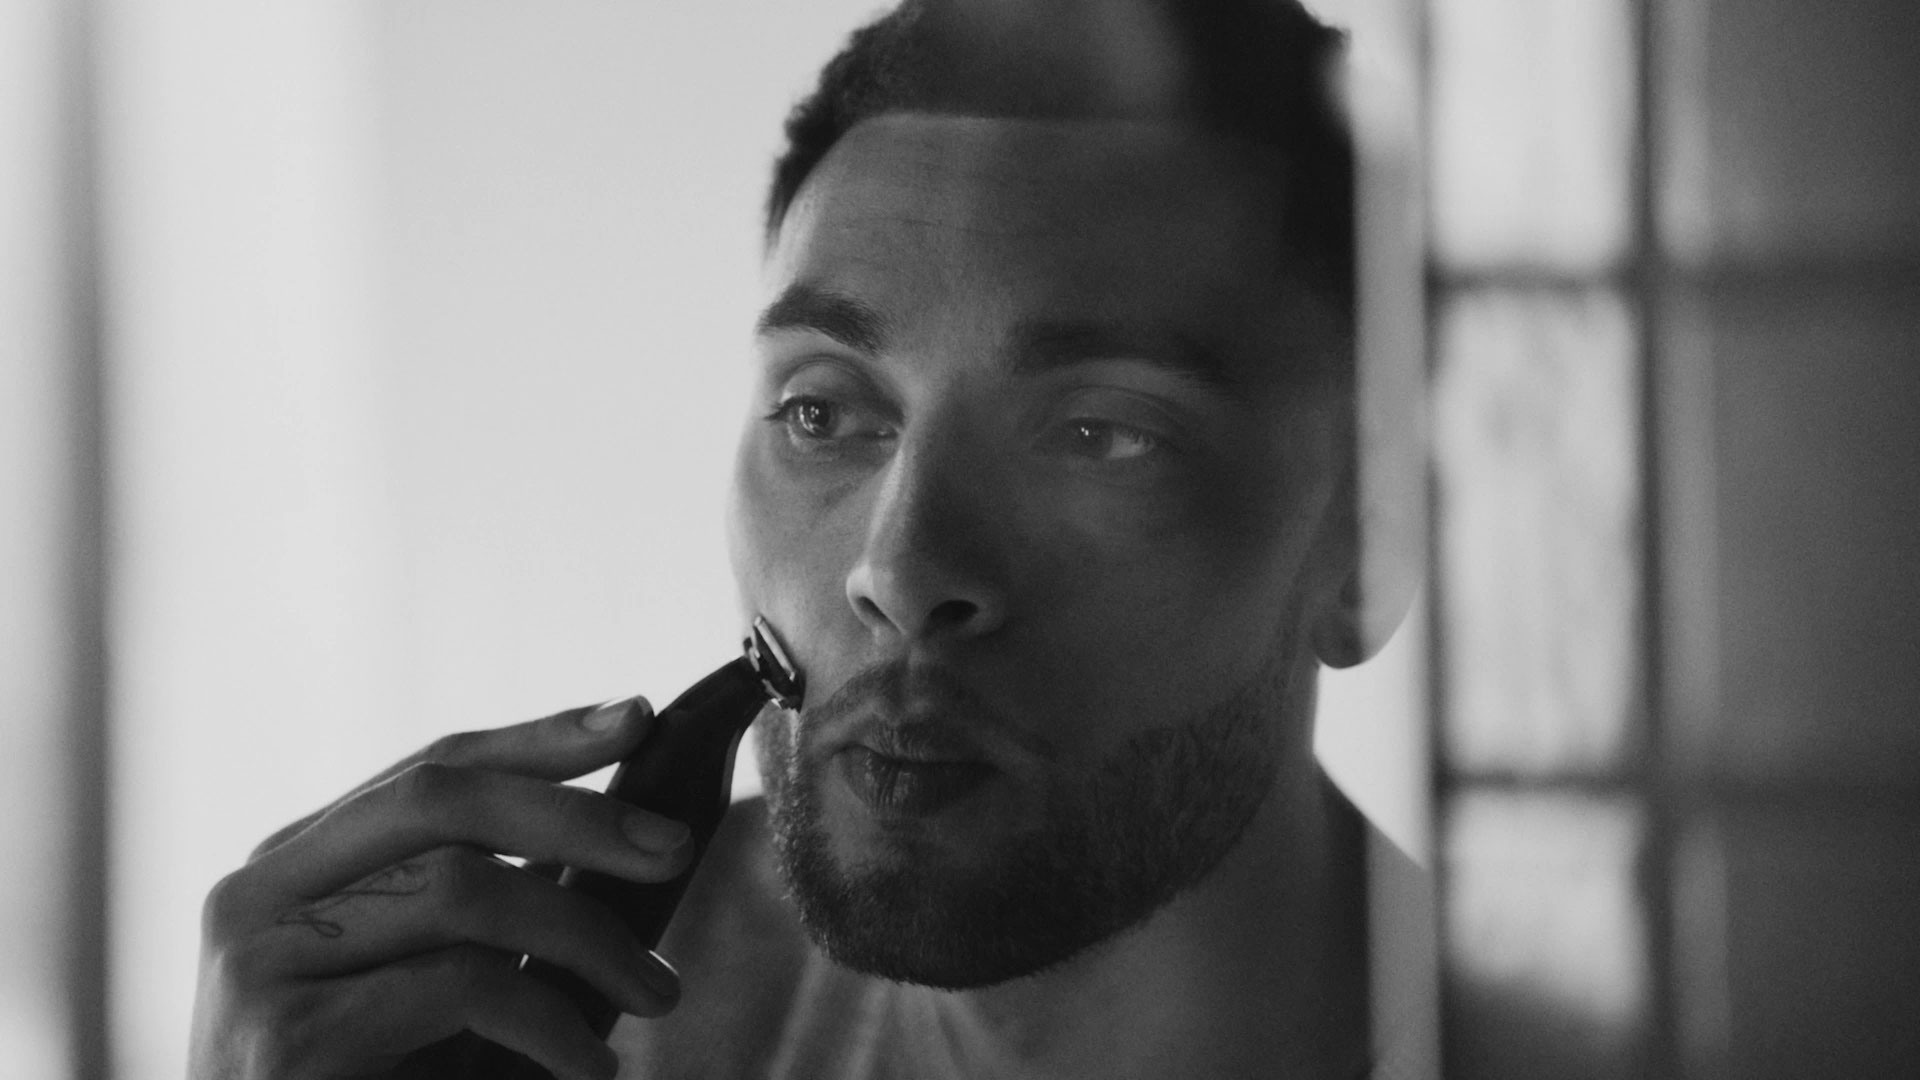 Black and white photo of NBA Bulls player Zach Lavine shaving his face with a Gillette razor in the mirror.